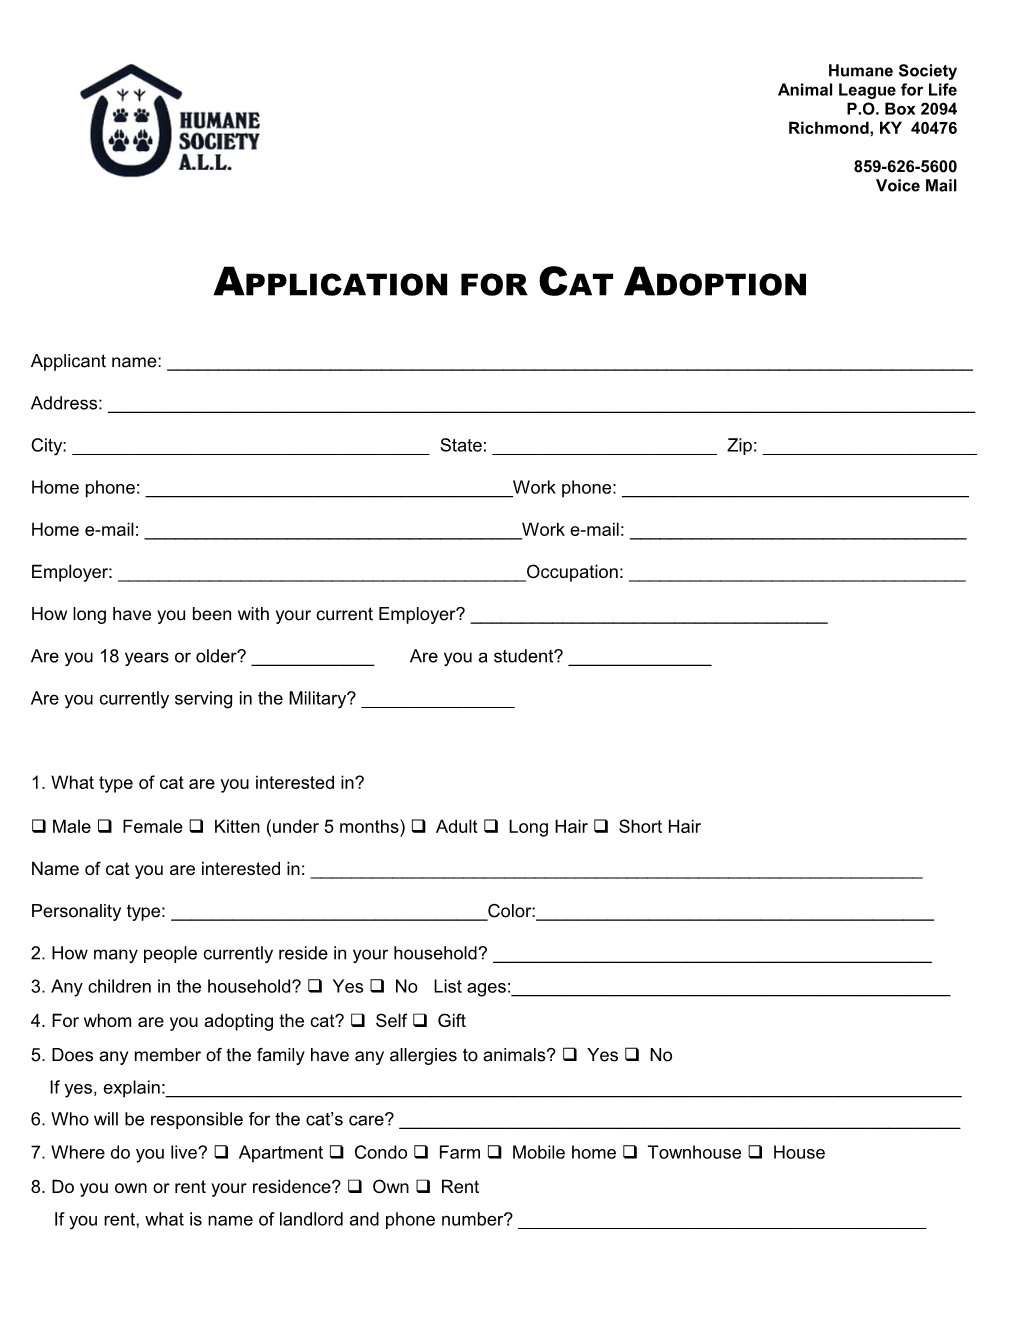 Application for Cat Adoption s1